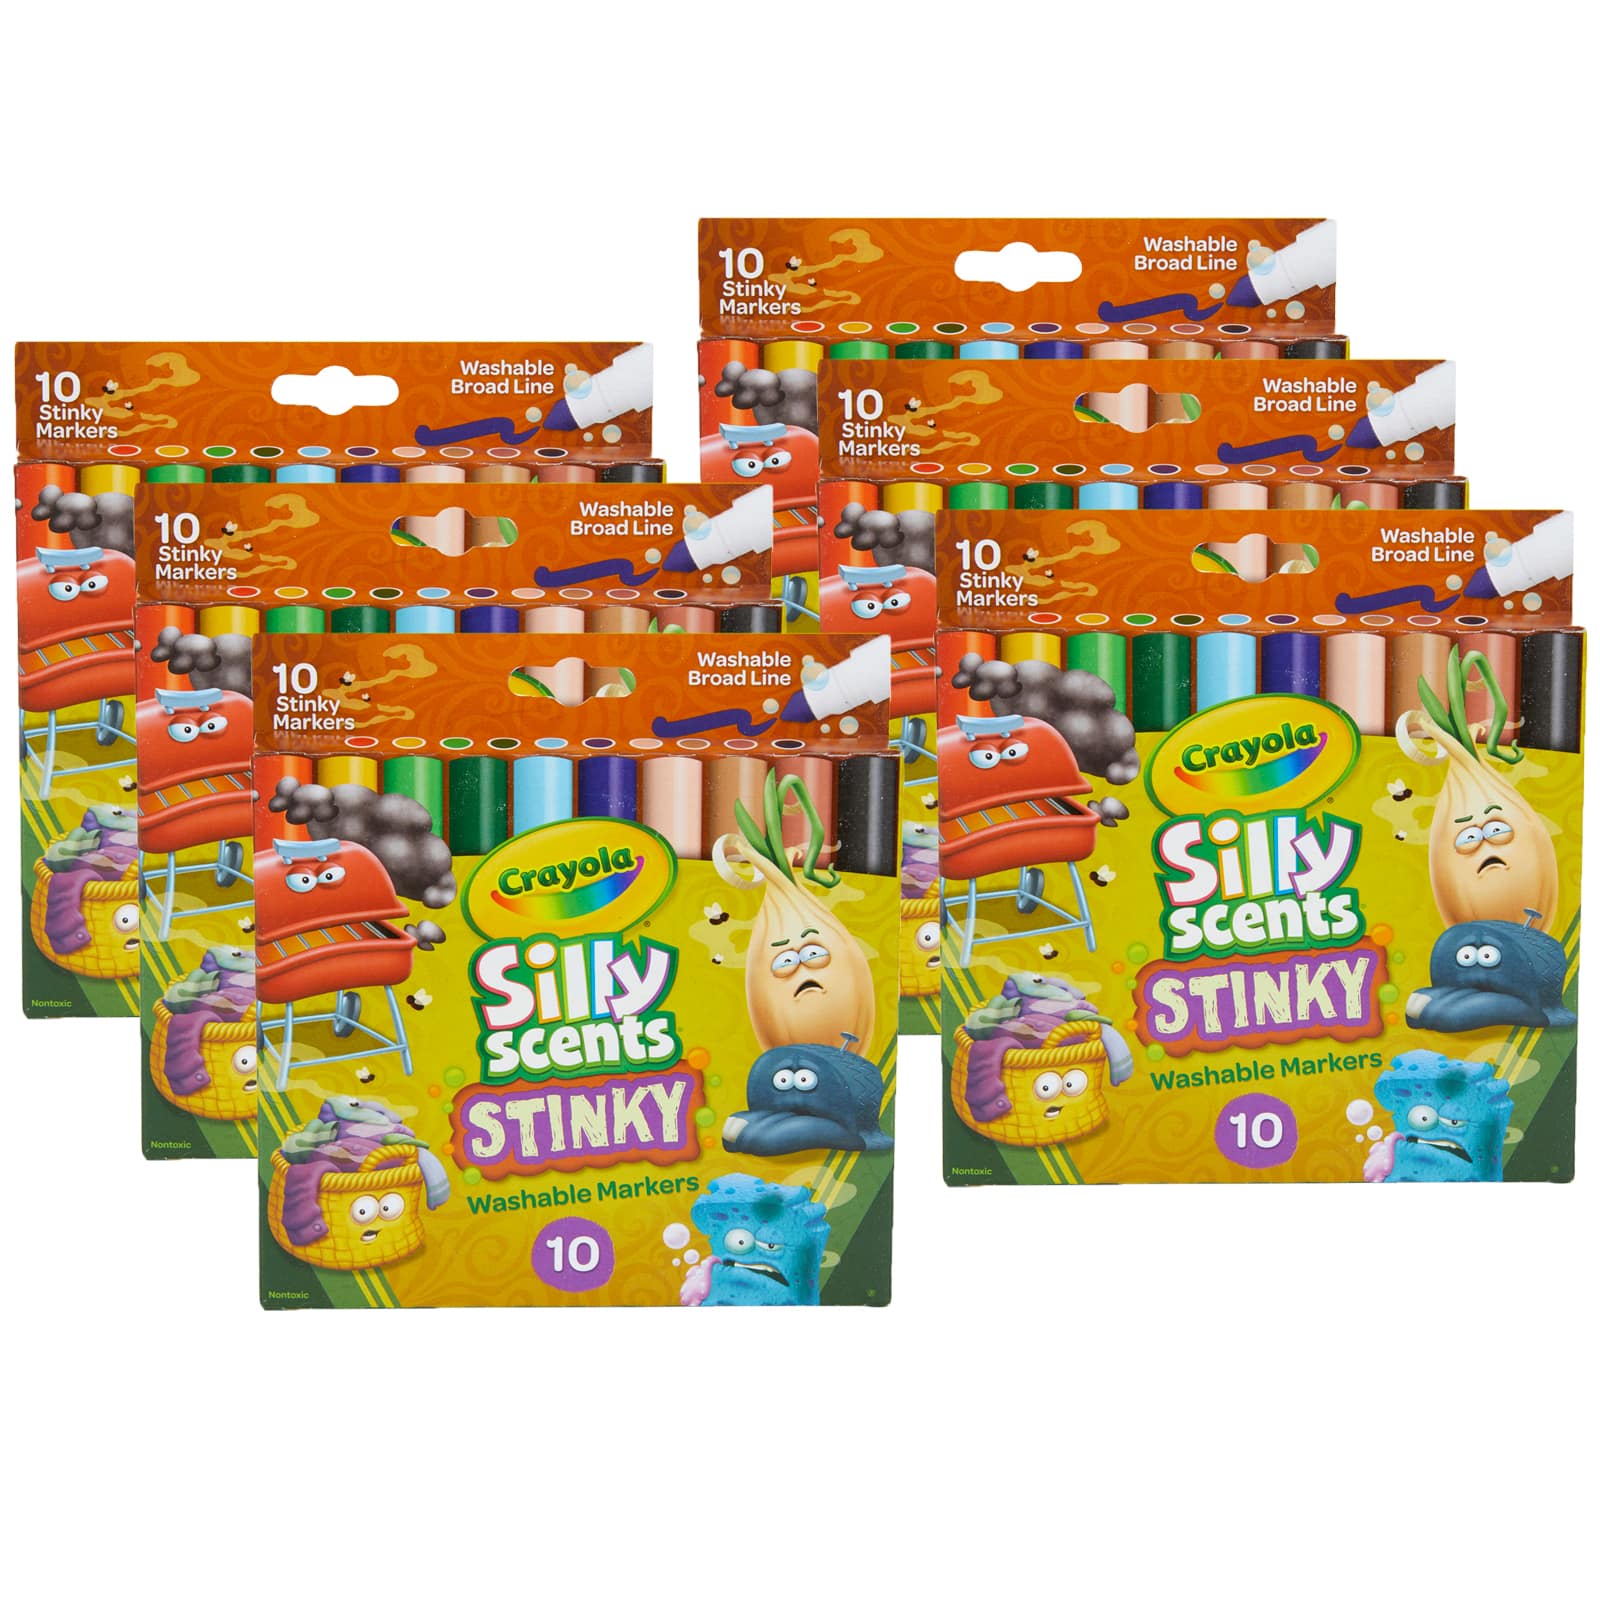 Crayola® Silly Scents Stinky Washable Broad Line Markers, 6 Packs of 10